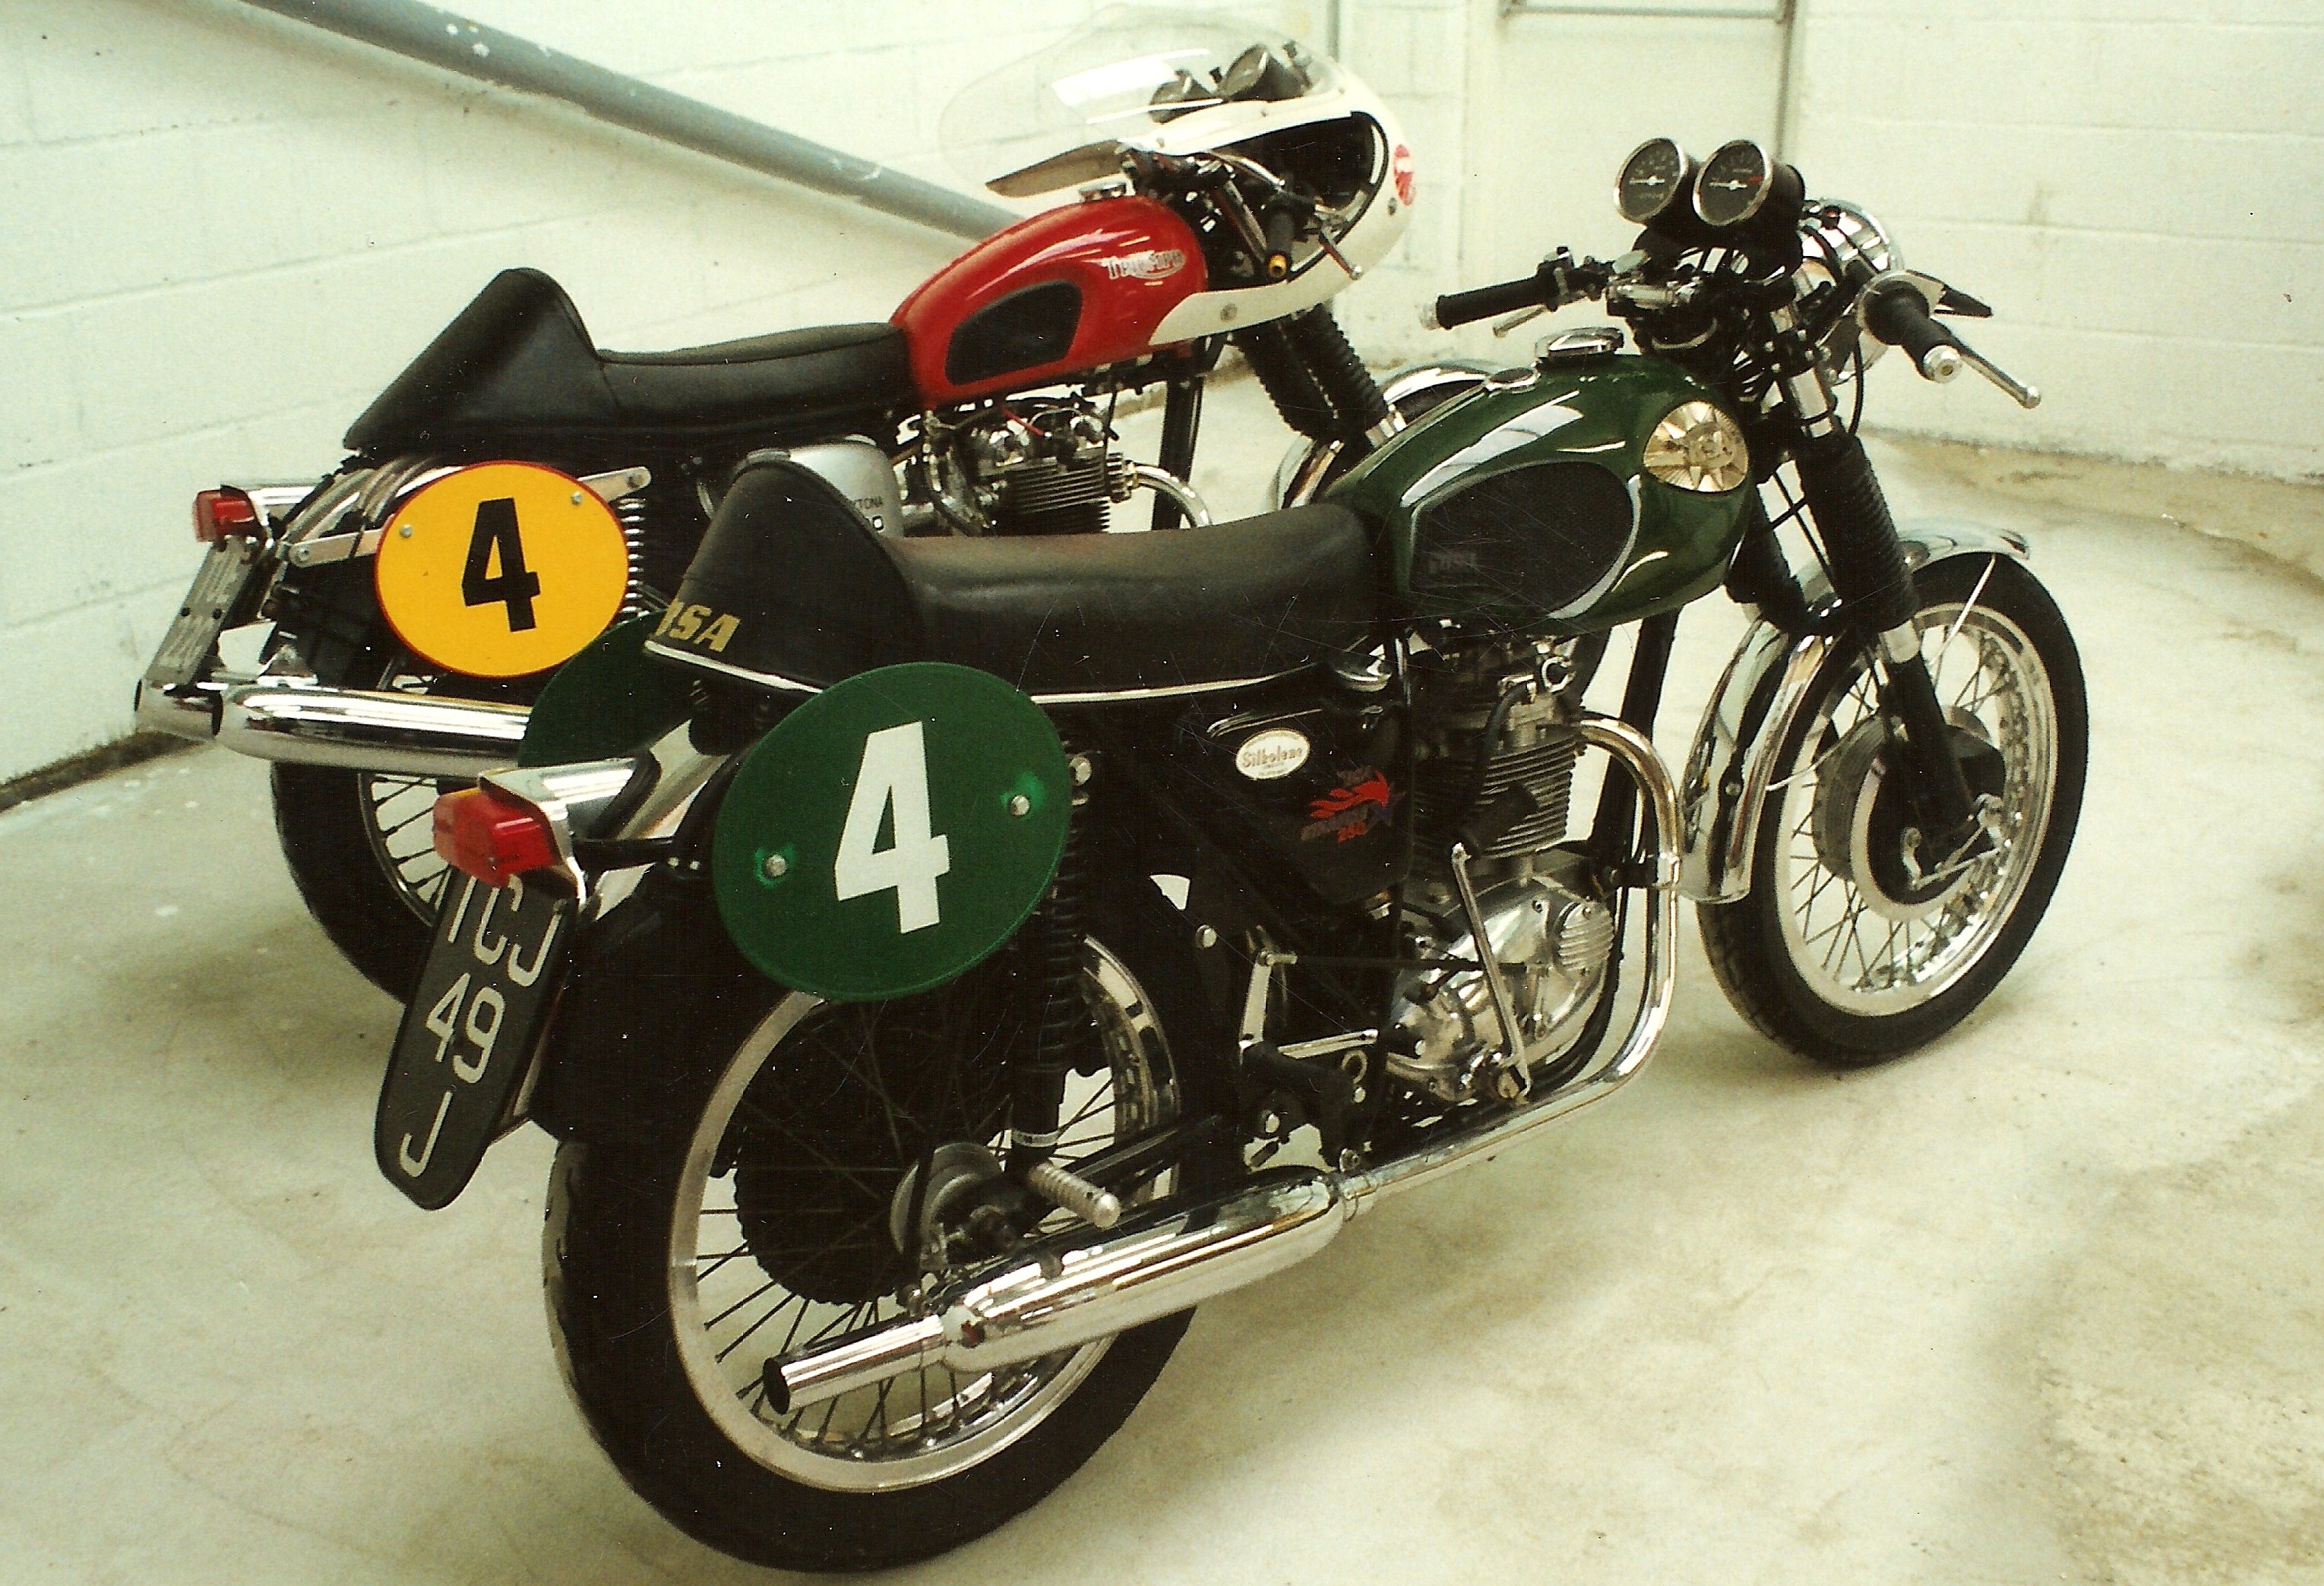 The RJM Team Sara production class racing stable of the 1990's, a chilli hot Daytona and a positivley jalapeno Starfire